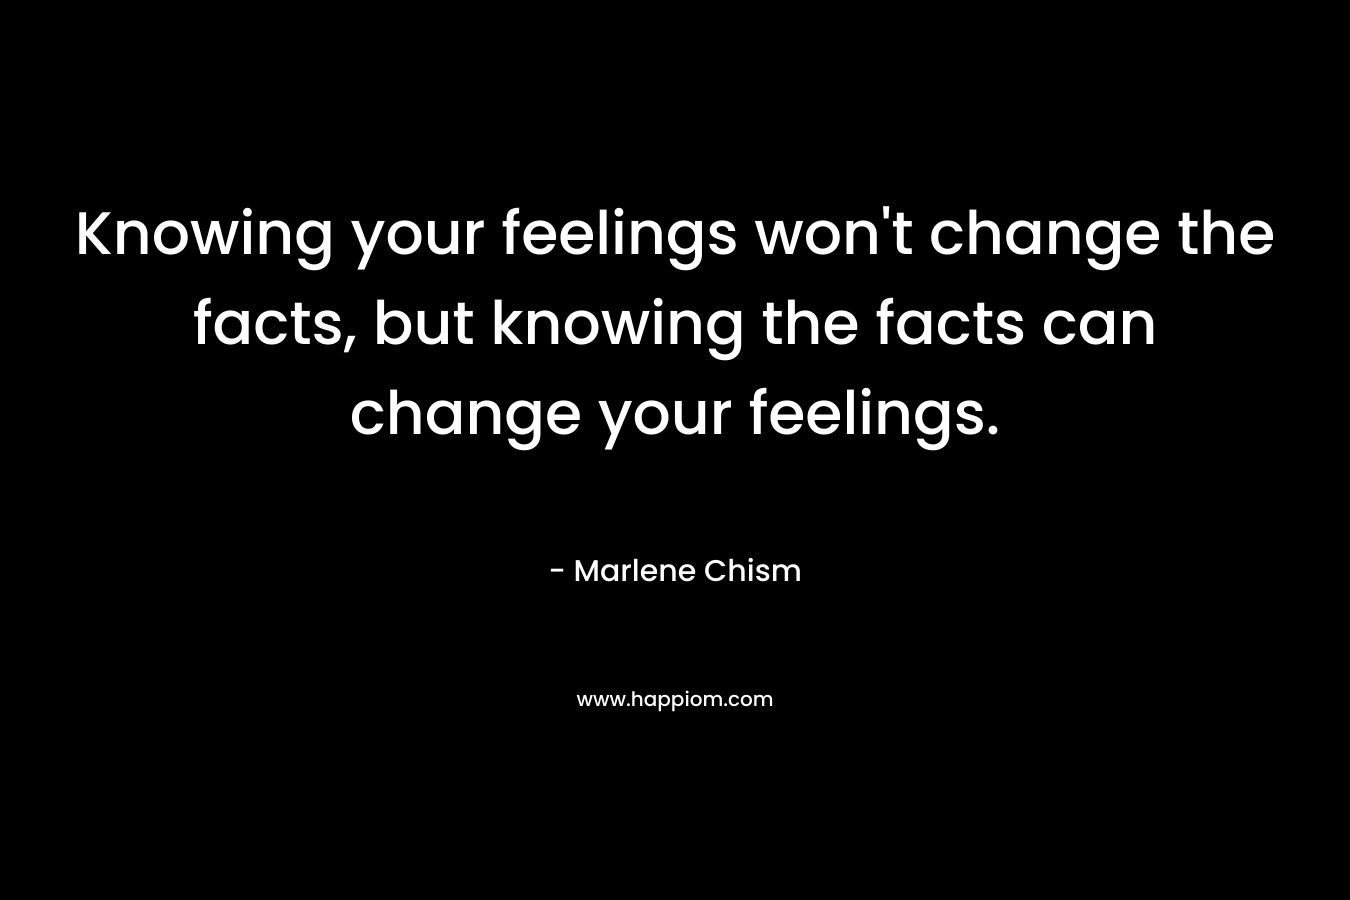 Knowing your feelings won't change the facts, but knowing the facts can change your feelings.